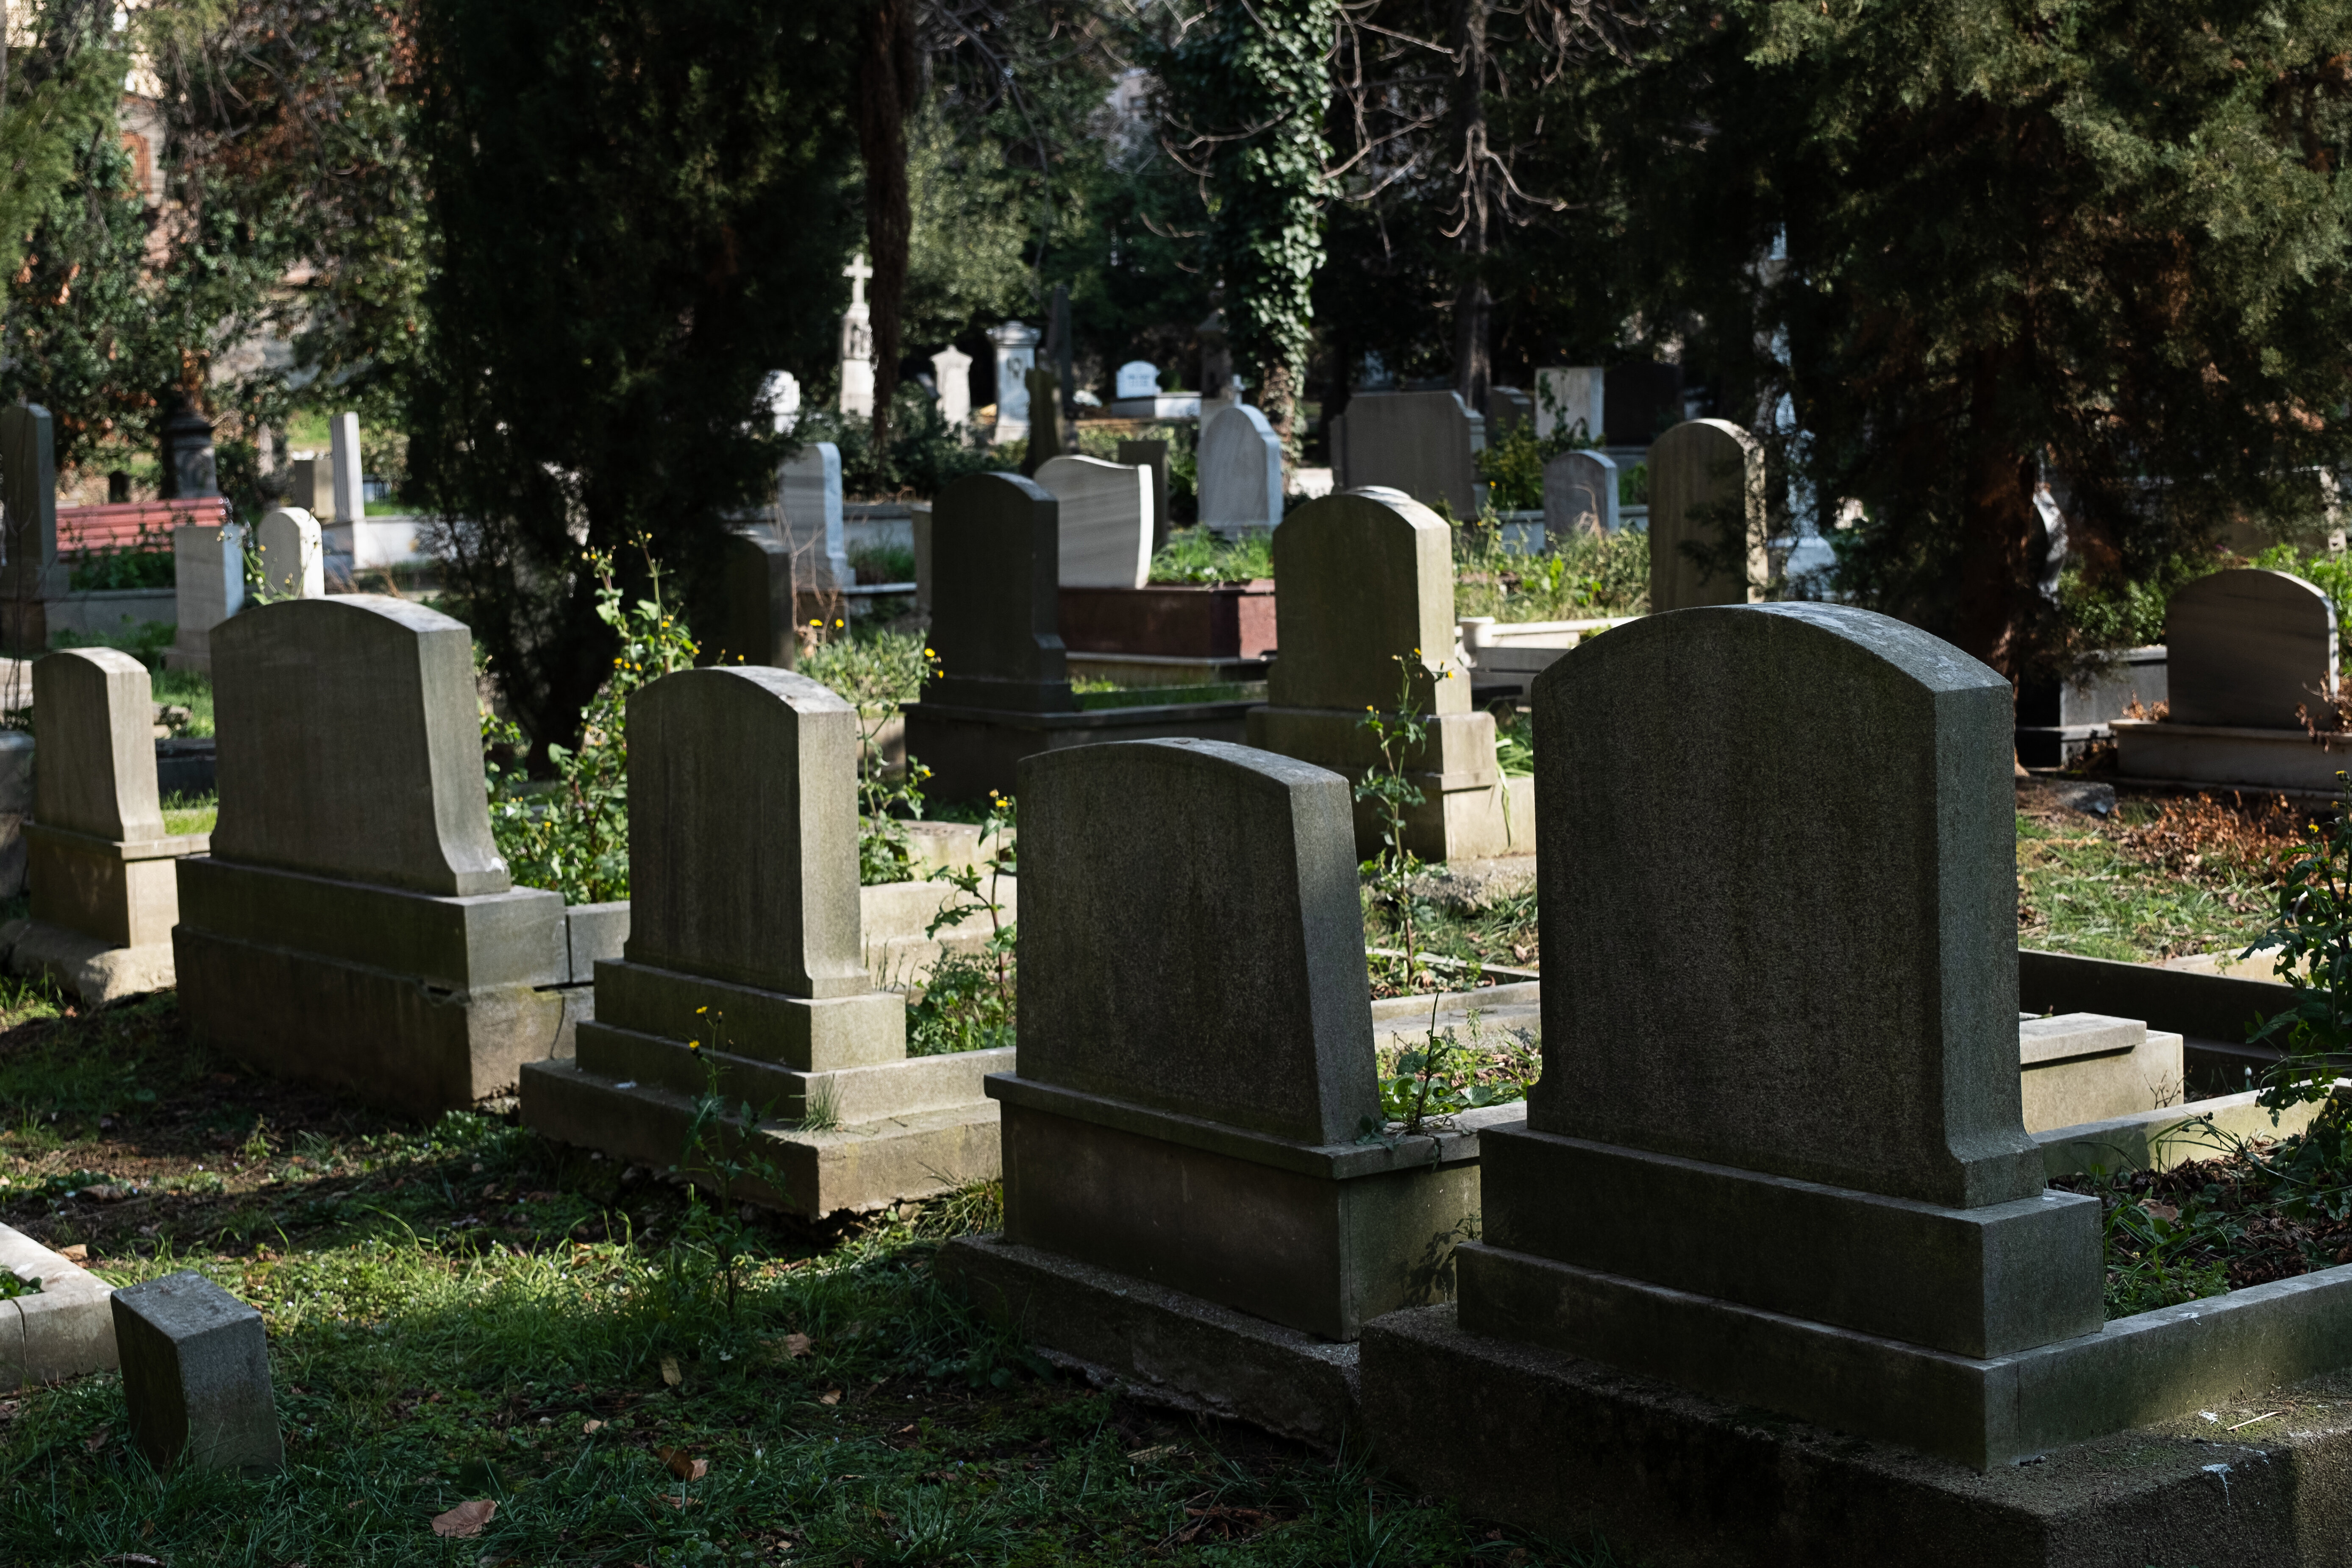 Suffolk Police Struggle To Stop Sex On Tombstones HuffPost UK News